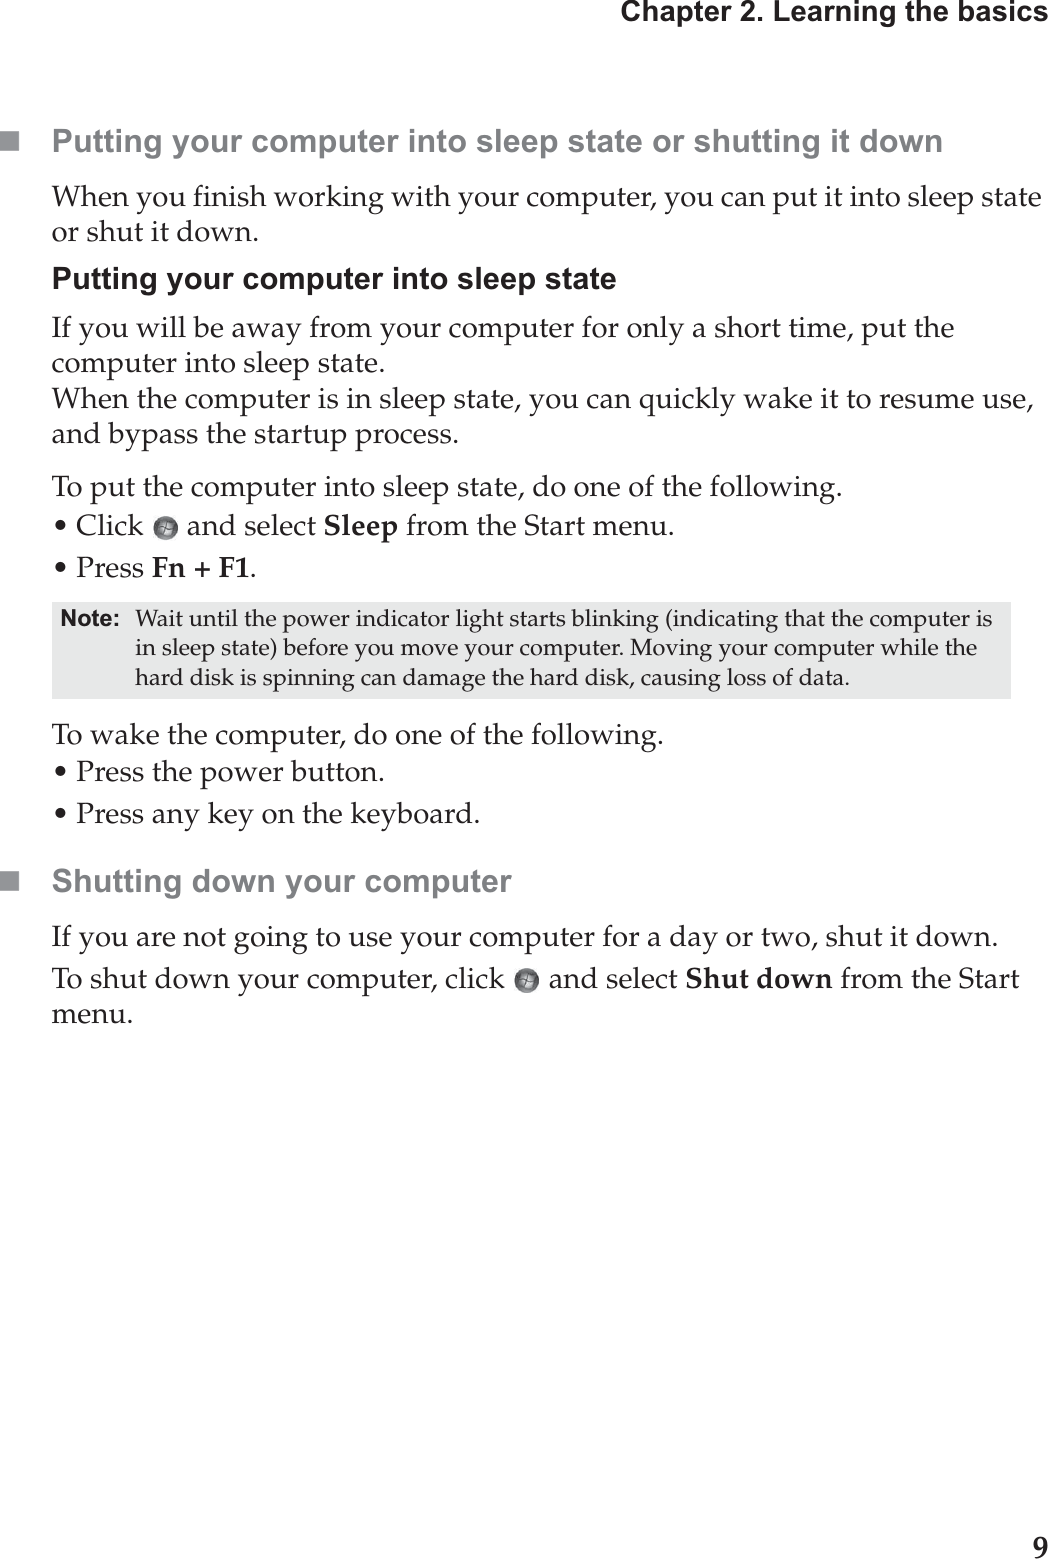 Chapter 2. Learning the basics9Putting your computer into sleep state or shutting it down When you finish working with your computer, you can put it into sleep state or shut it down.Putting your computer into sleep stateIf you will be away from your computer for only a short time, put the computer into sleep state. When the computer is in sleep state, you can quickly wake it to resume use, and bypass the startup process.To put the computer into sleep state, do one of the following.• Click   and select Sleep from the Start menu.•Press Fn + F1.To wake the computer, do one of the following.• Press the power button.• Press any key on the keyboard.Shutting down your computerIf you are not going to use your computer for a day or two, shut it down.To shut down your computer, click  and select Shut down from the Start menu.Note: Wait until the power indicator light starts blinking (indicating that the computer is in sleep state) before you move your computer. Moving your computer while the hard disk is spinning can damage the hard disk, causing loss of data.